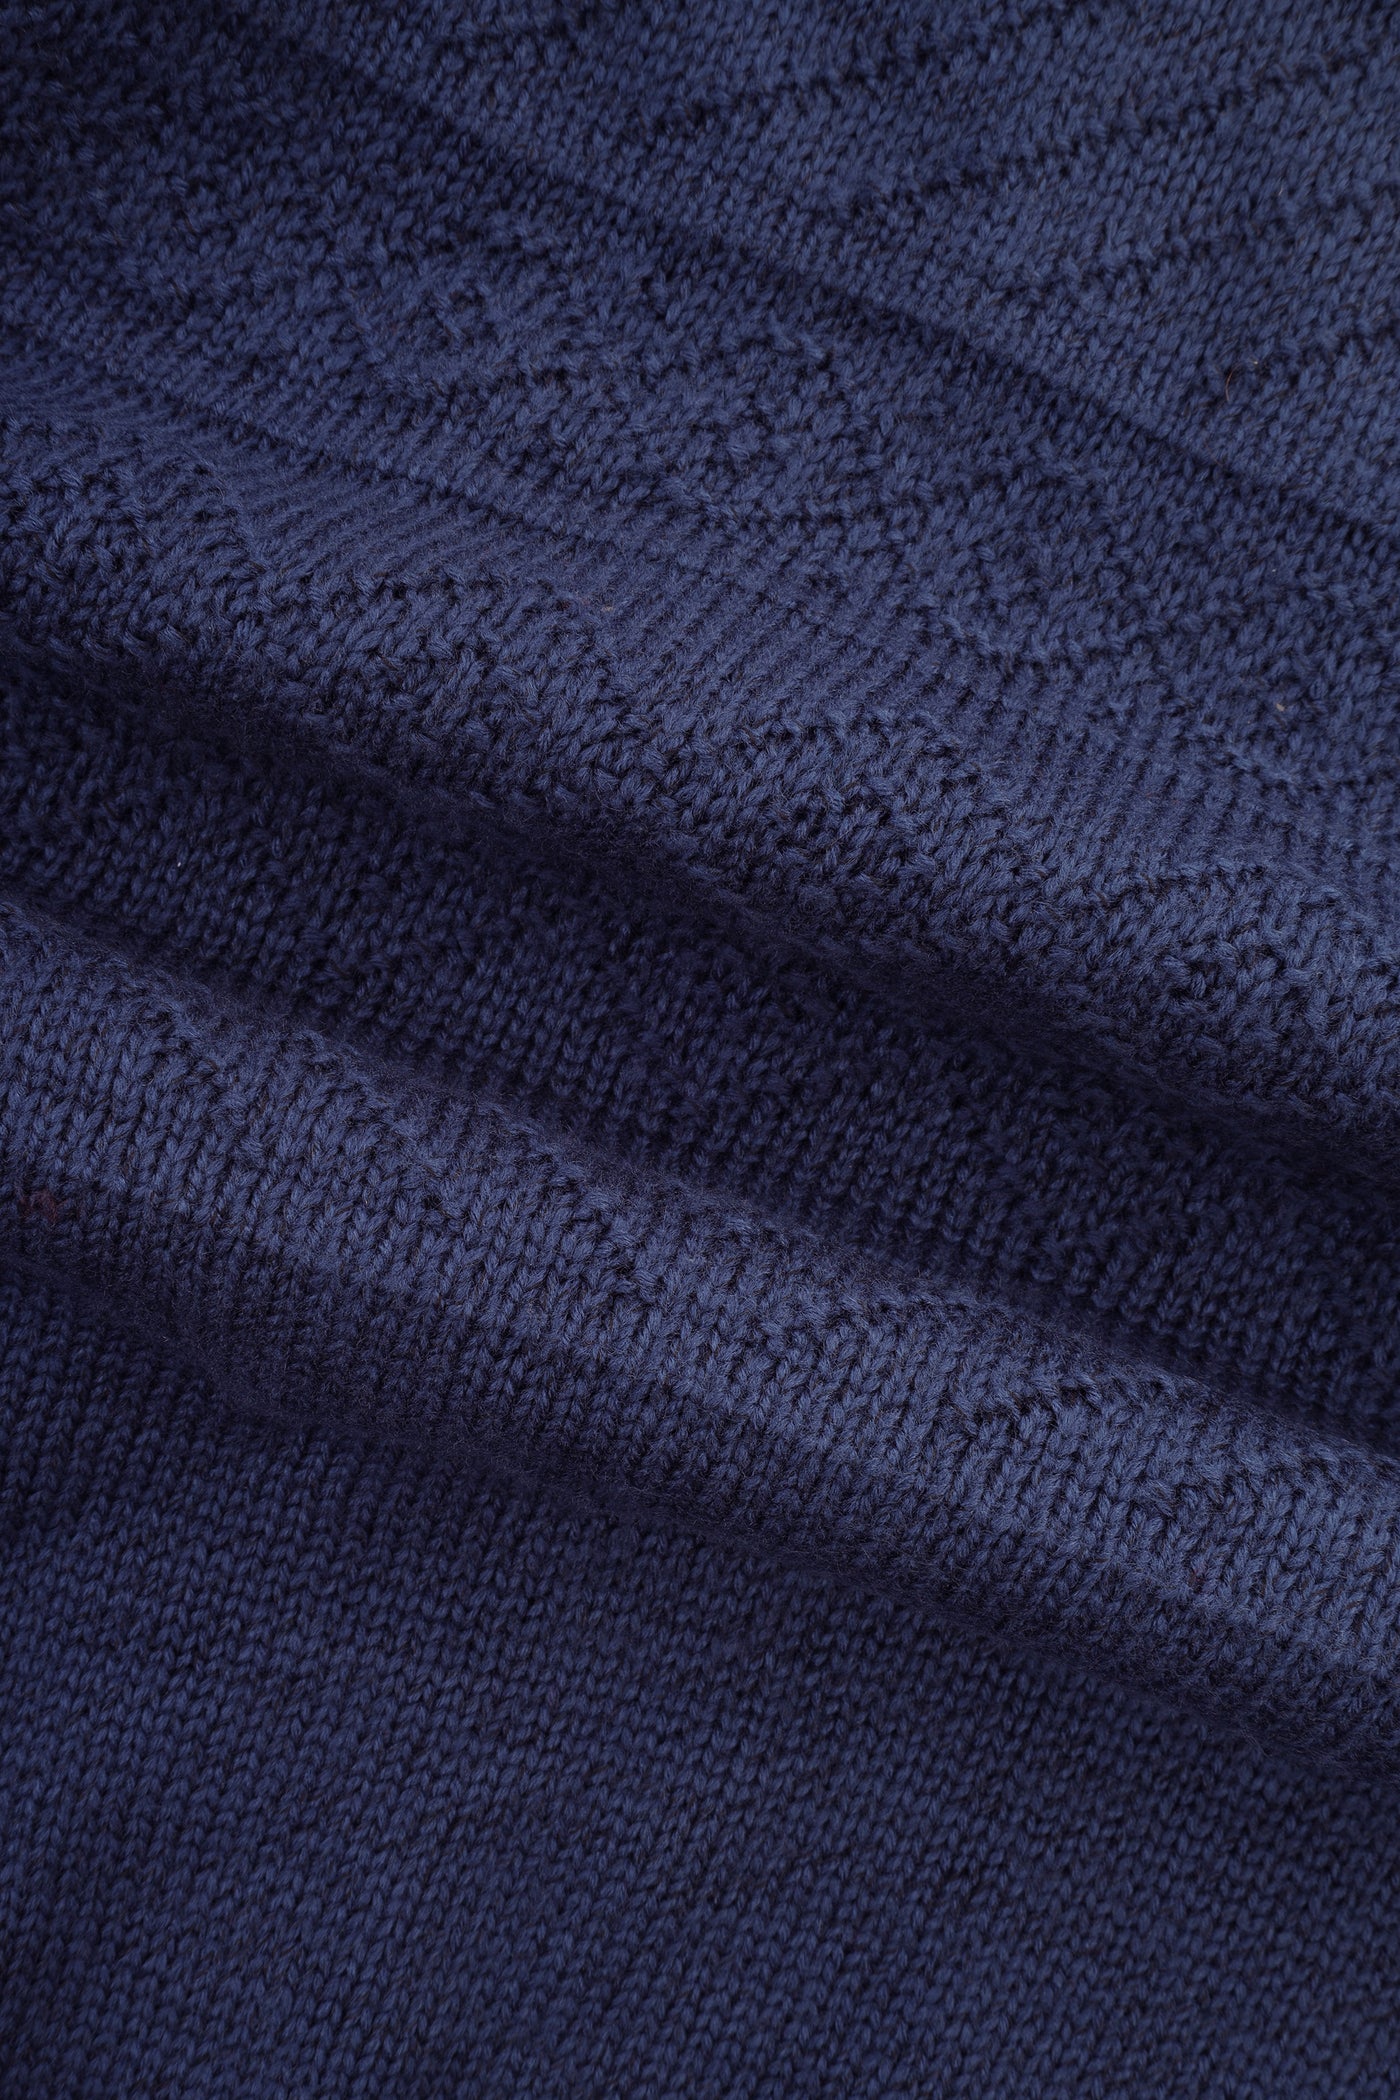 Jacquard Knitted Quarter Zip Navy Pullover